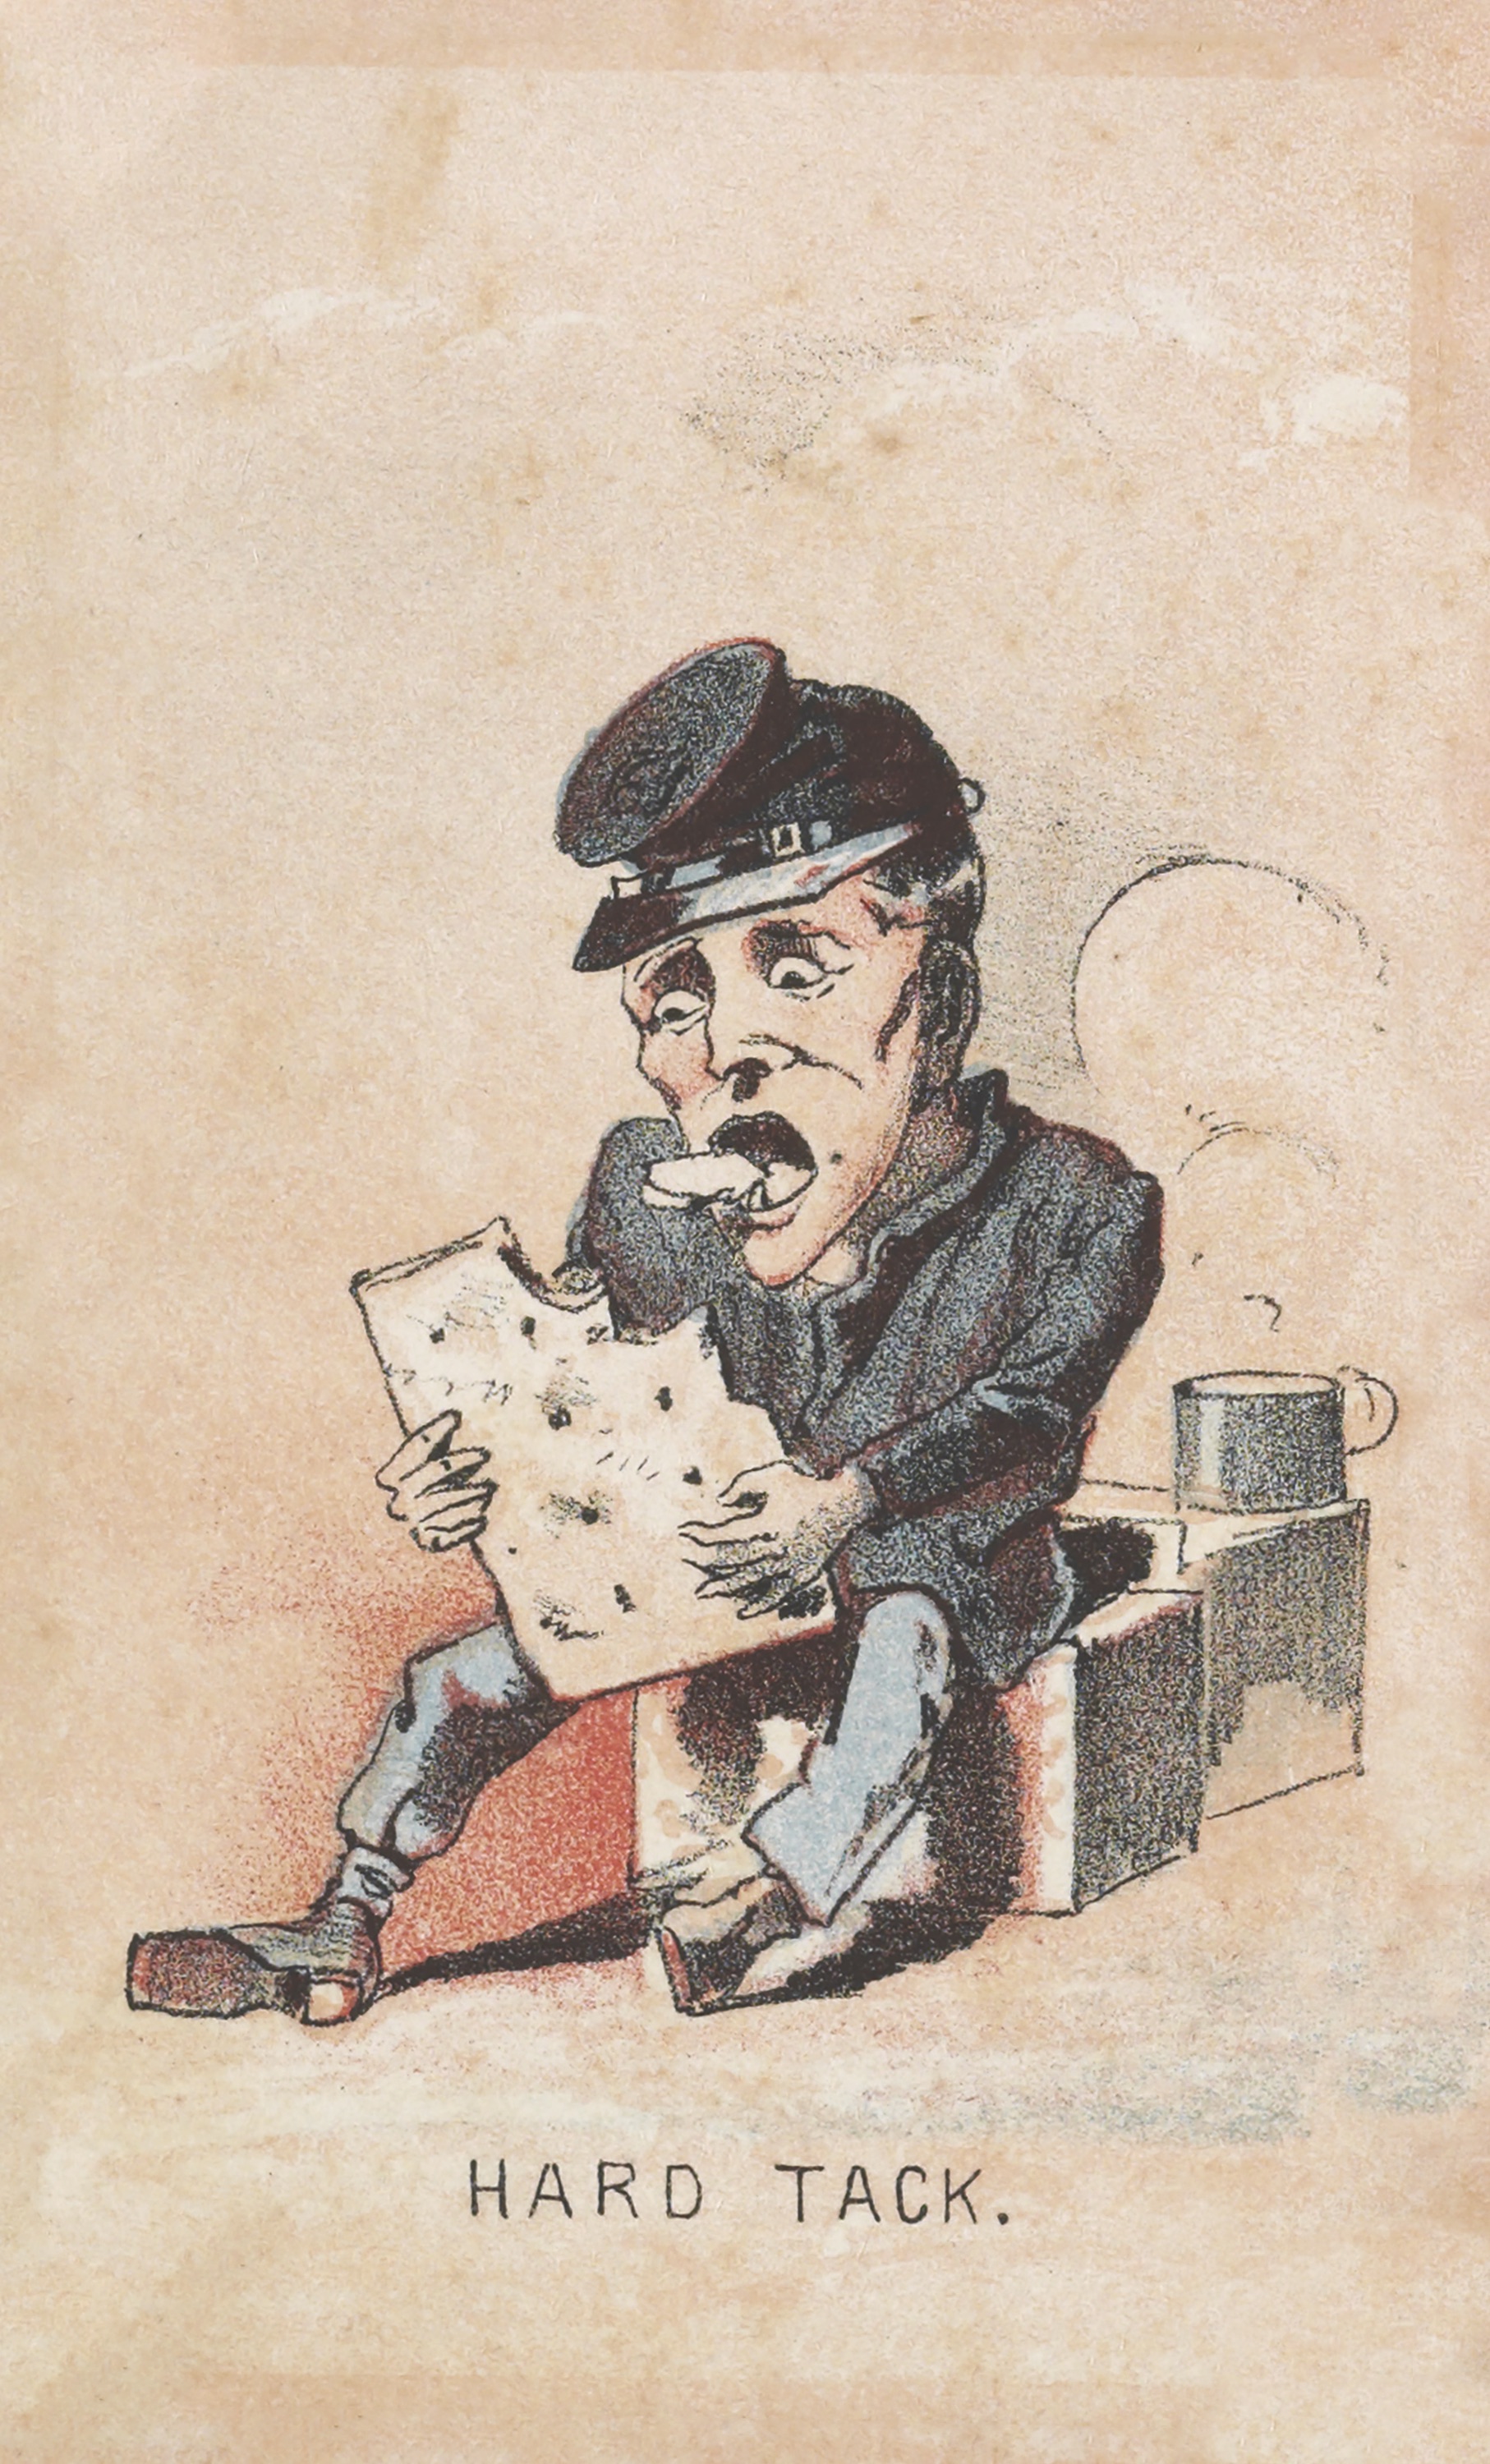 A Union soldier tackles a hardtack biscuit. (Library of Congress)